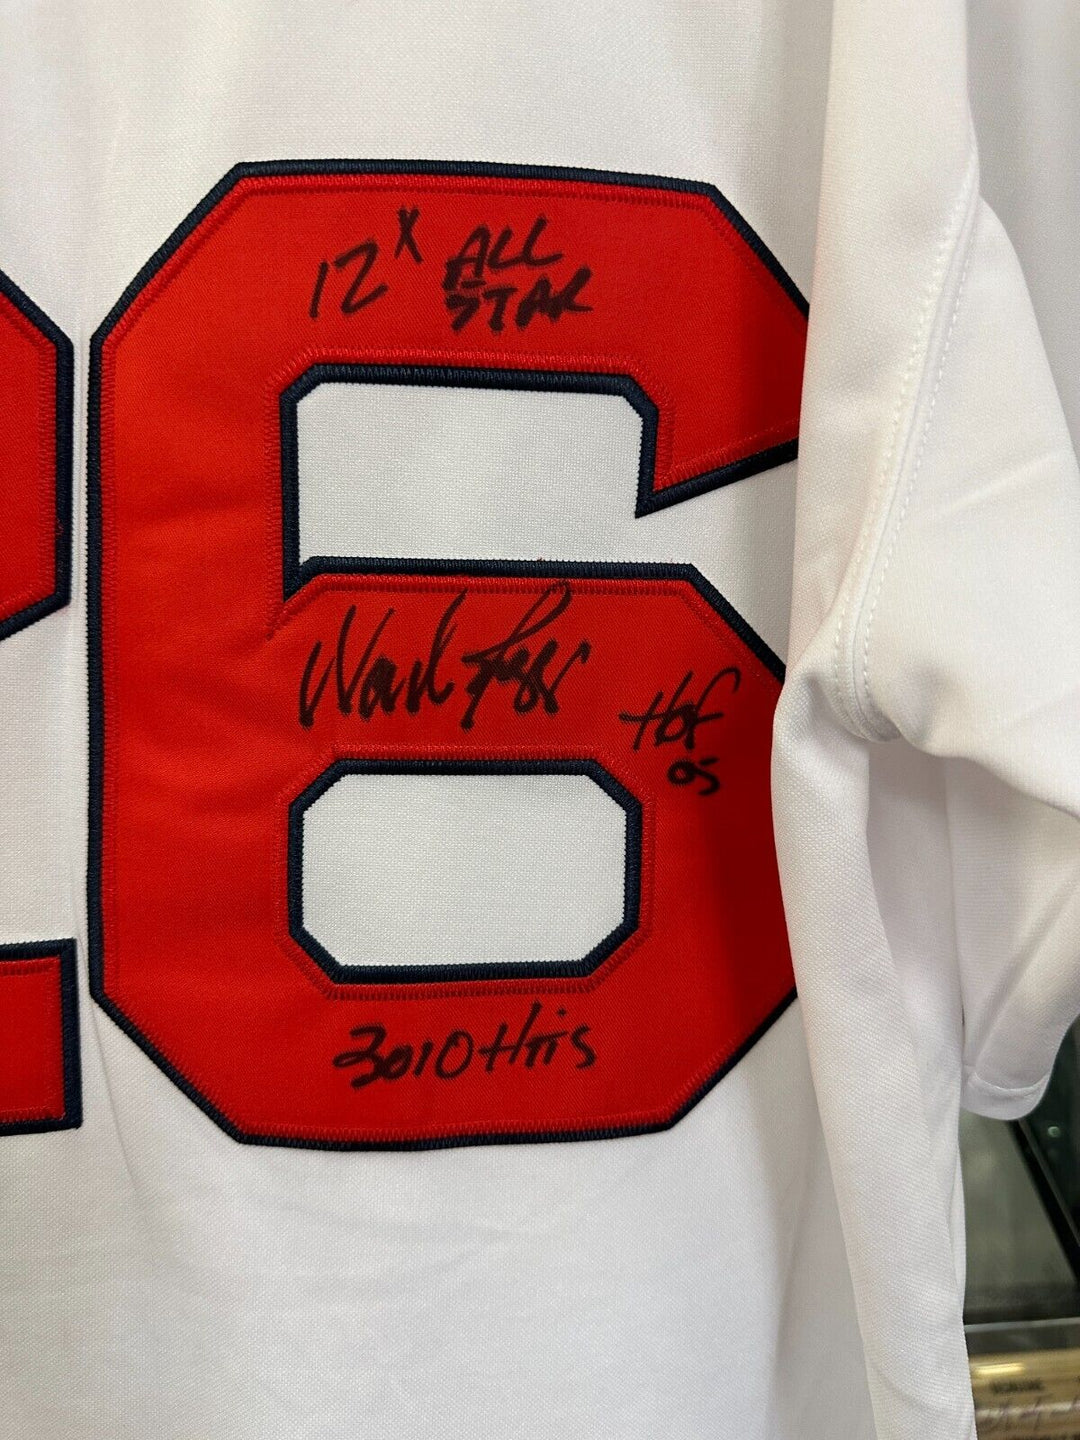 Wade Boggs Signed 1987 Red Sox Mitchell & Ness Jersey W/ HOF 3010 Hits 12 AS